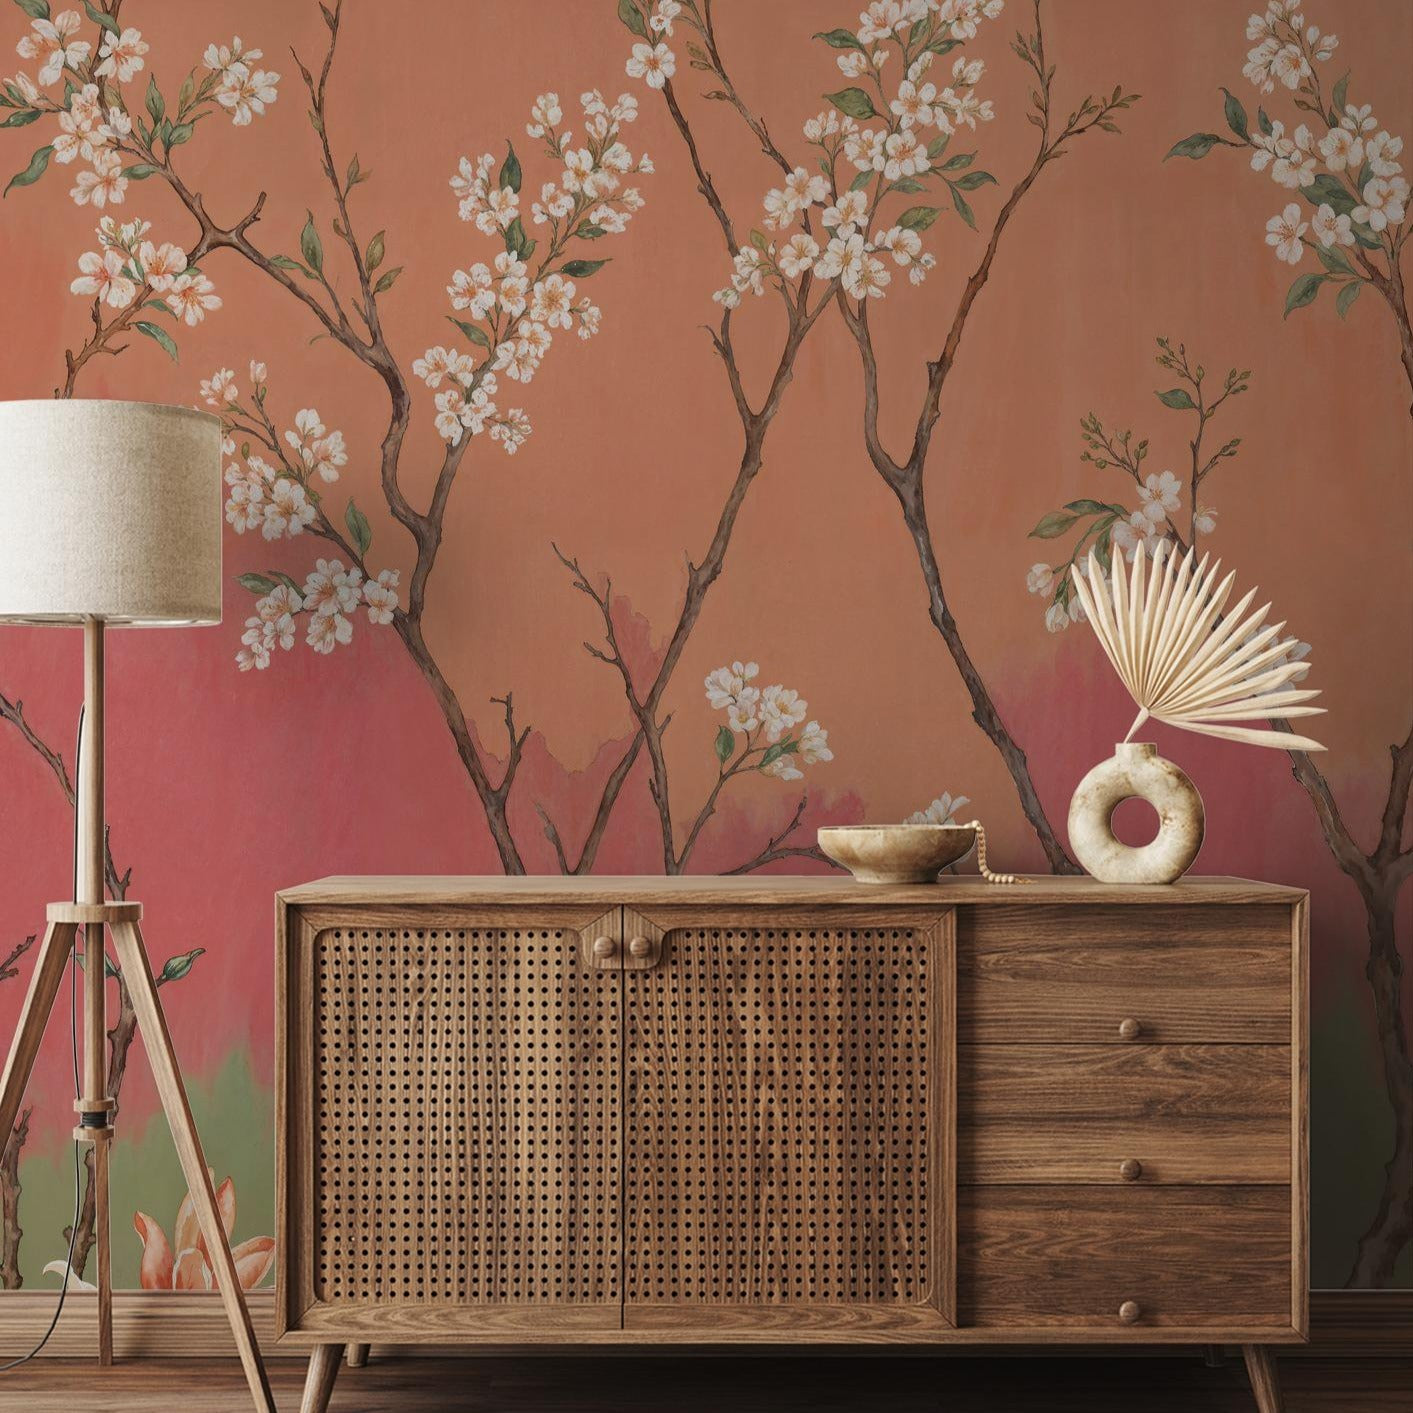 "Wall Blush Ombre Bloom Wallpaper showcasing floral patterns in a stylish living room setting."